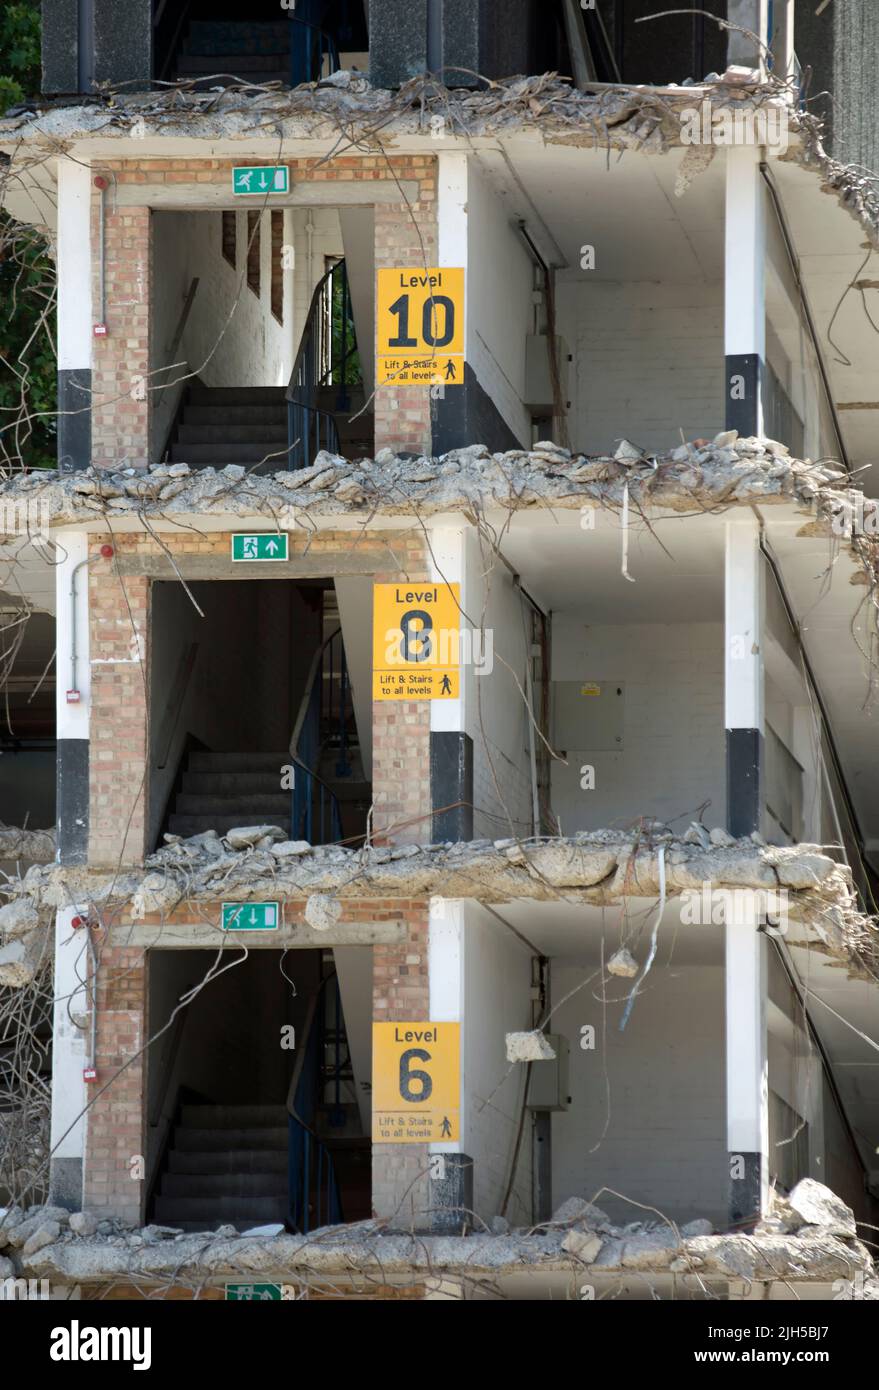 a partially demolished multi-storey car park in kingston upon thames, surrey, england, still showing signs for levels, stairs and lifts Stock Photo